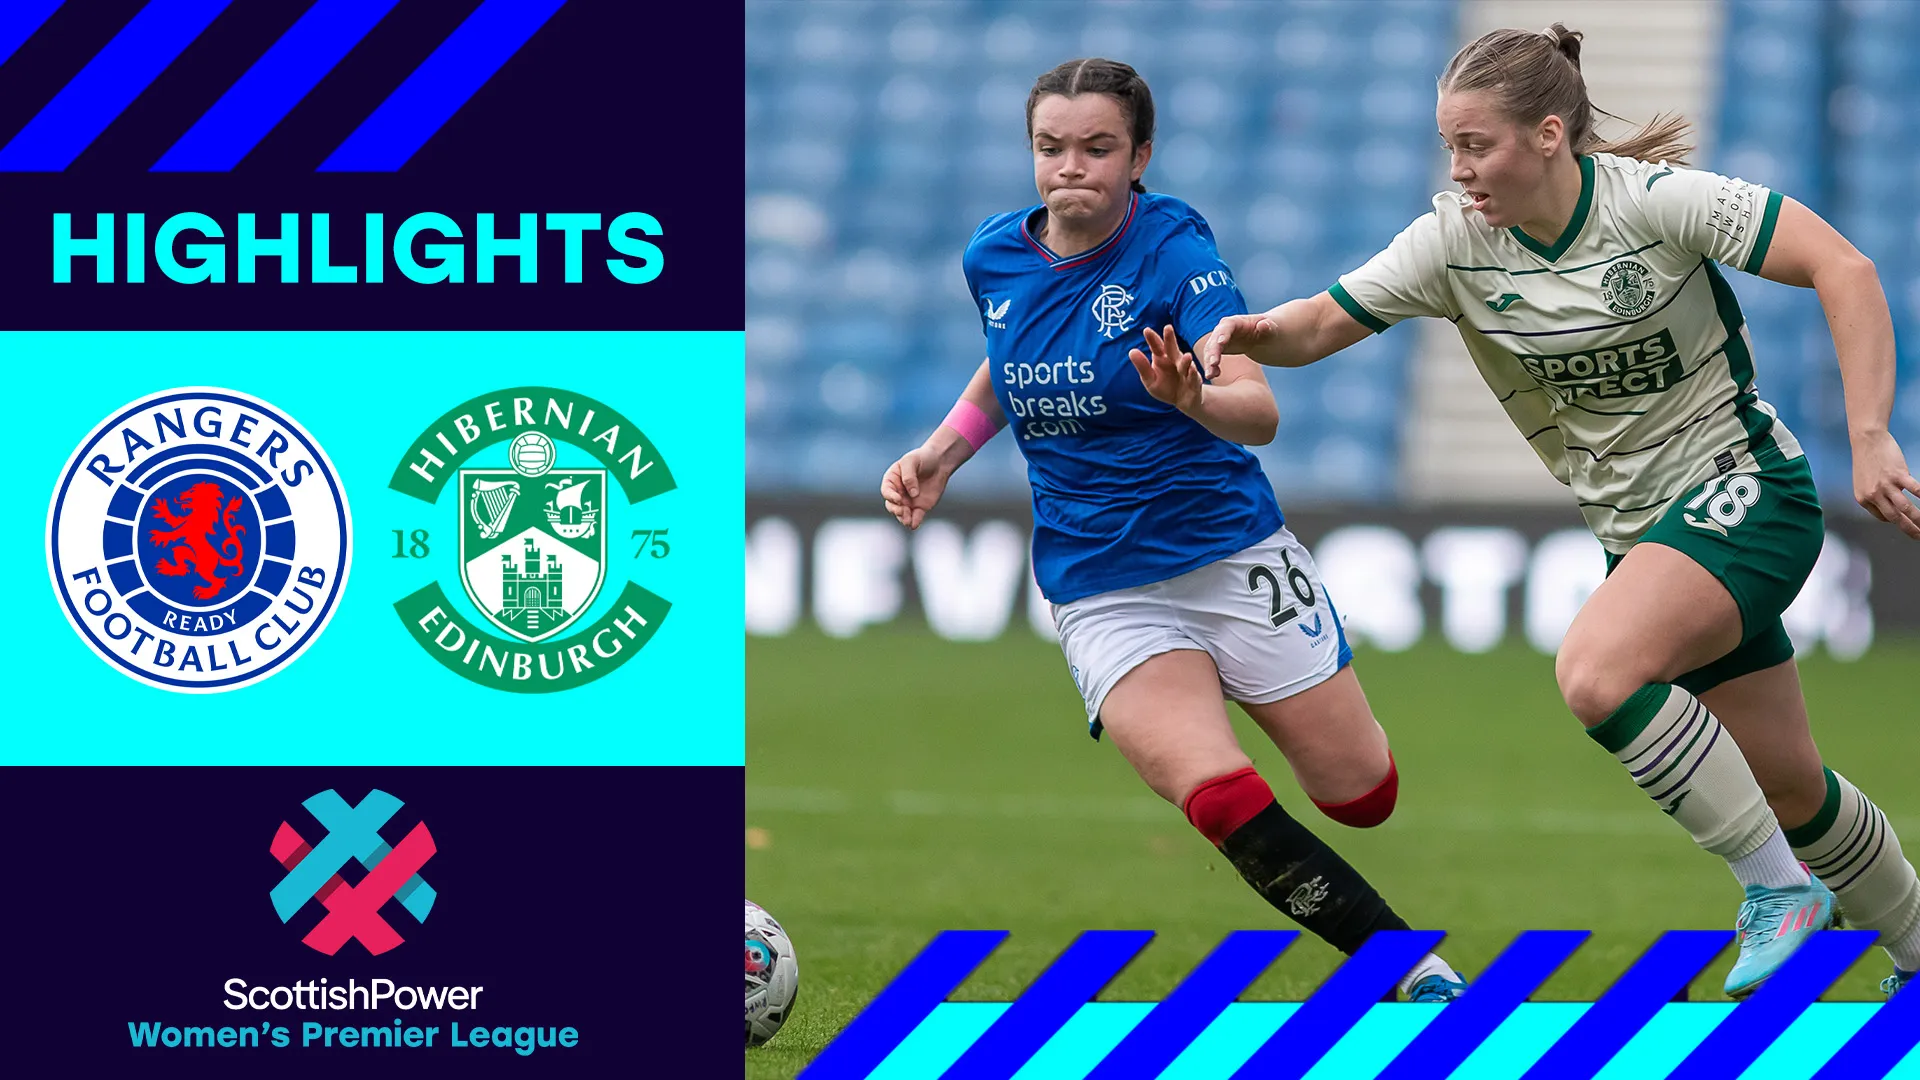 Image for Rangers 7-0 Hibernian | Gers thrash Hibs at Ibrox to keep pace at the top | SWPL